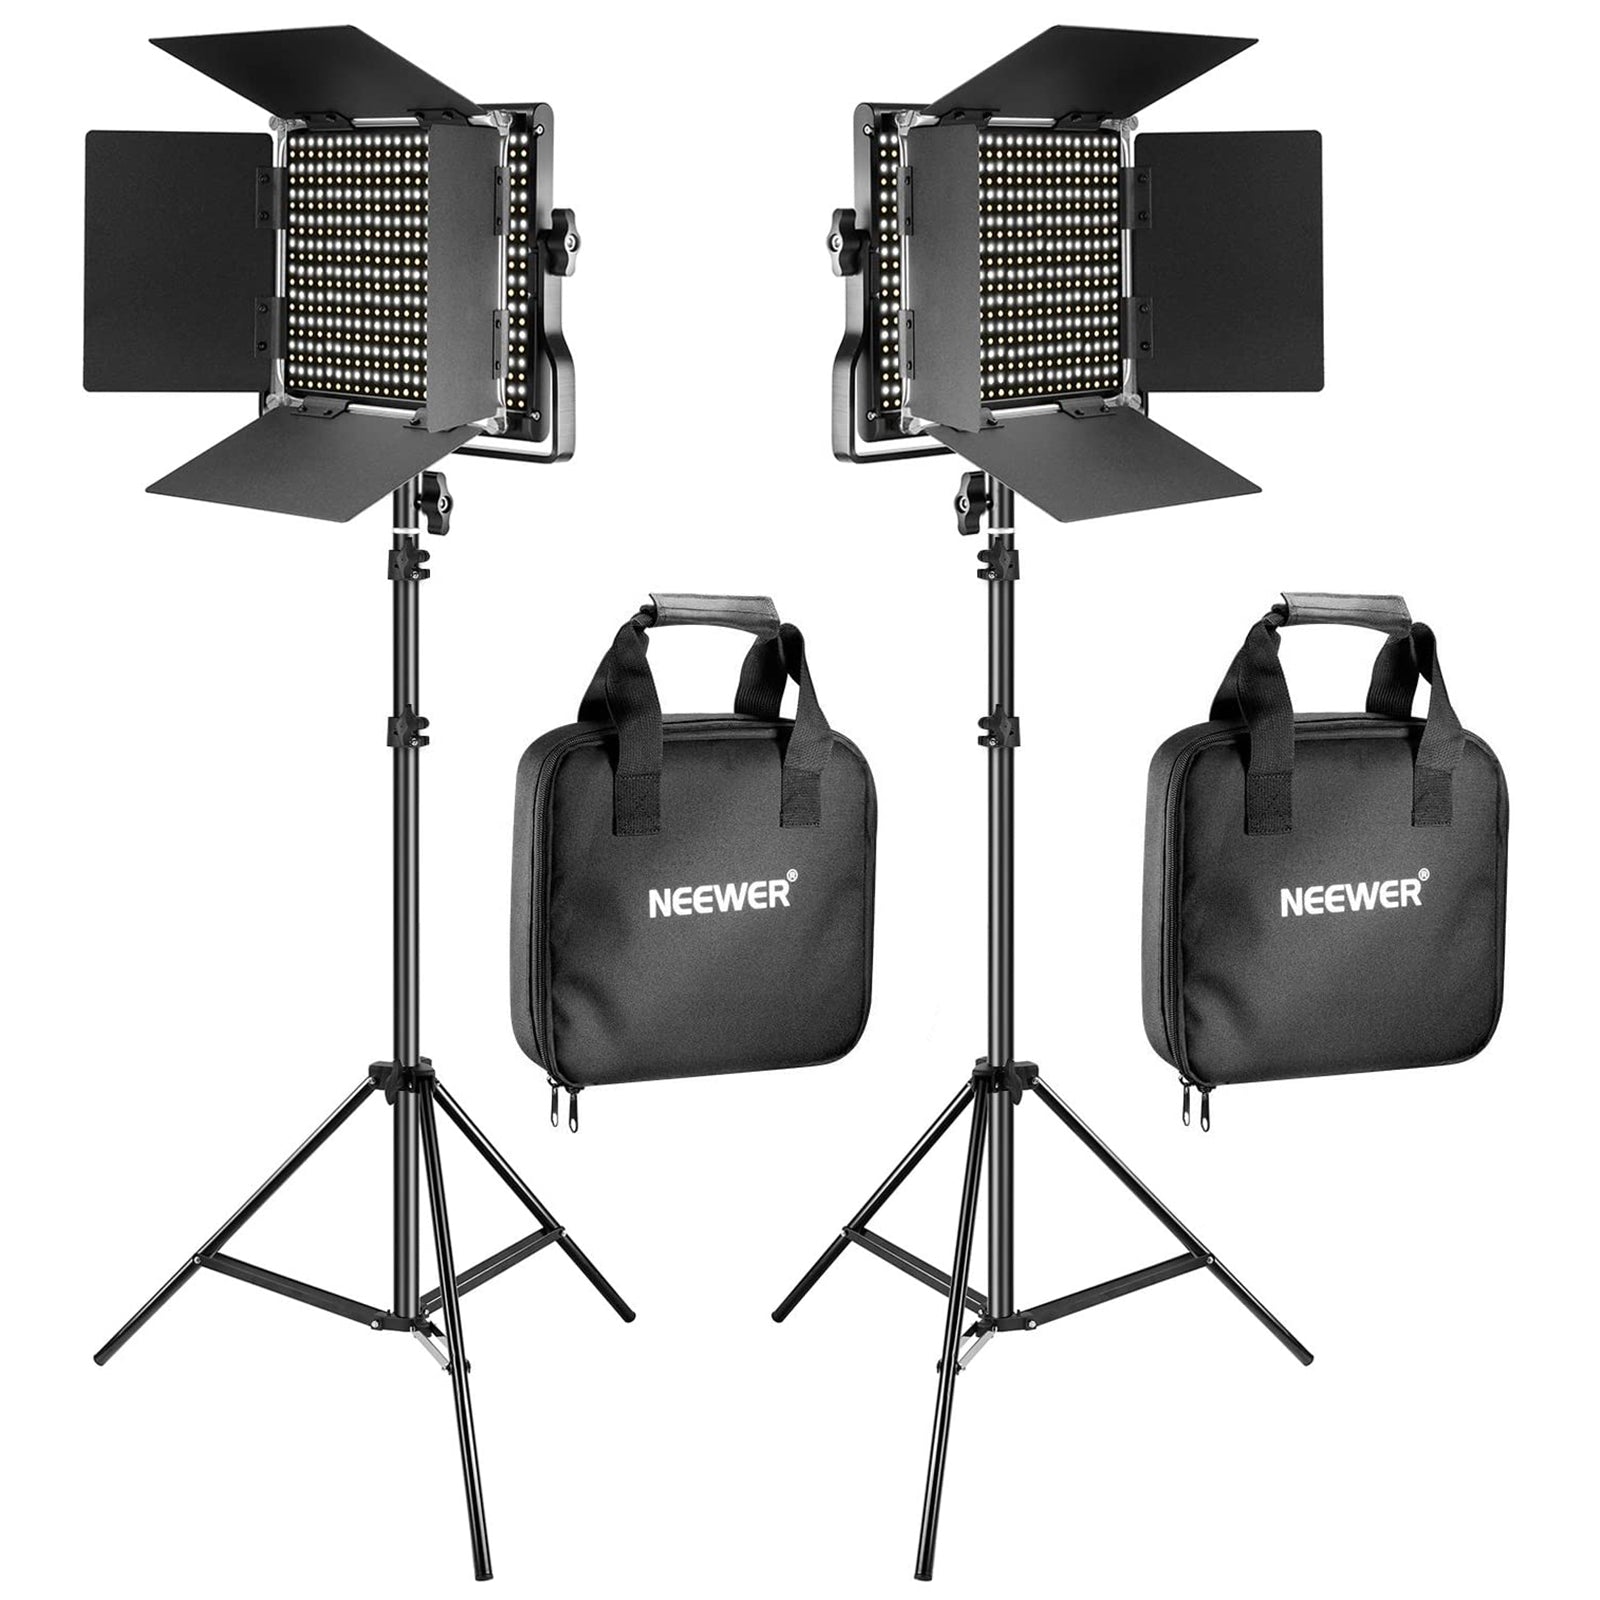 Neewer LED Light Panel Softbox for 660/530/480 LED Light - Outer 16.3'' x  6.5'', Inner 9.8'' x 8.7'', Foldable Light Diffuser with Strap Attachment  and Bag for Photo Studio Portrait Video Shooting Black